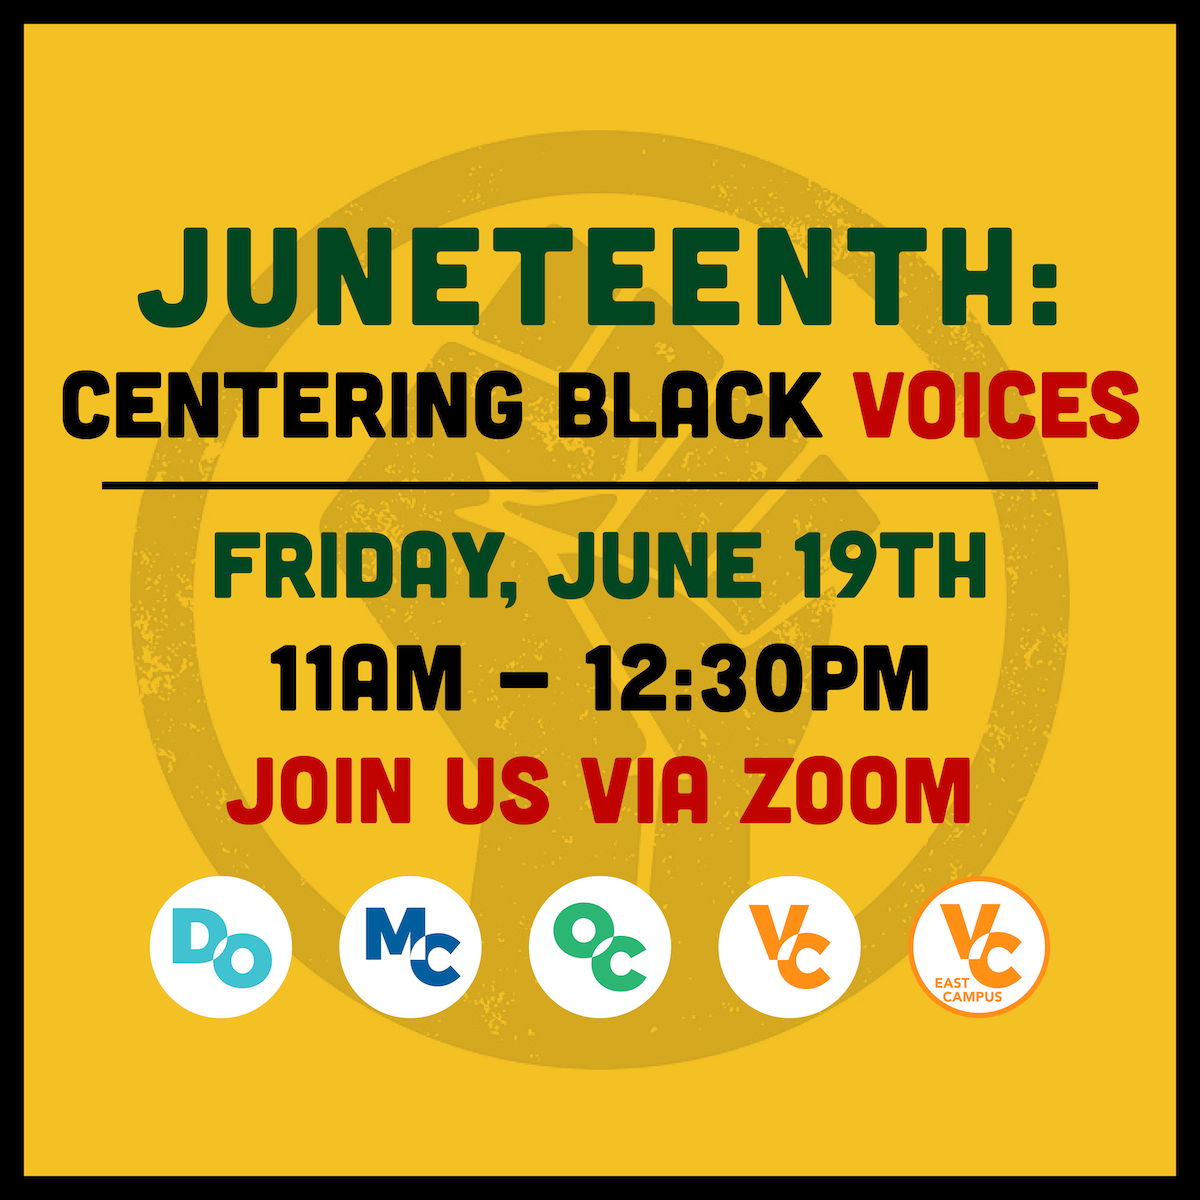 Juneteenth: Centering Black Voices. Friday June 19th 11am - 12:30pm Join Us Via Zoom.